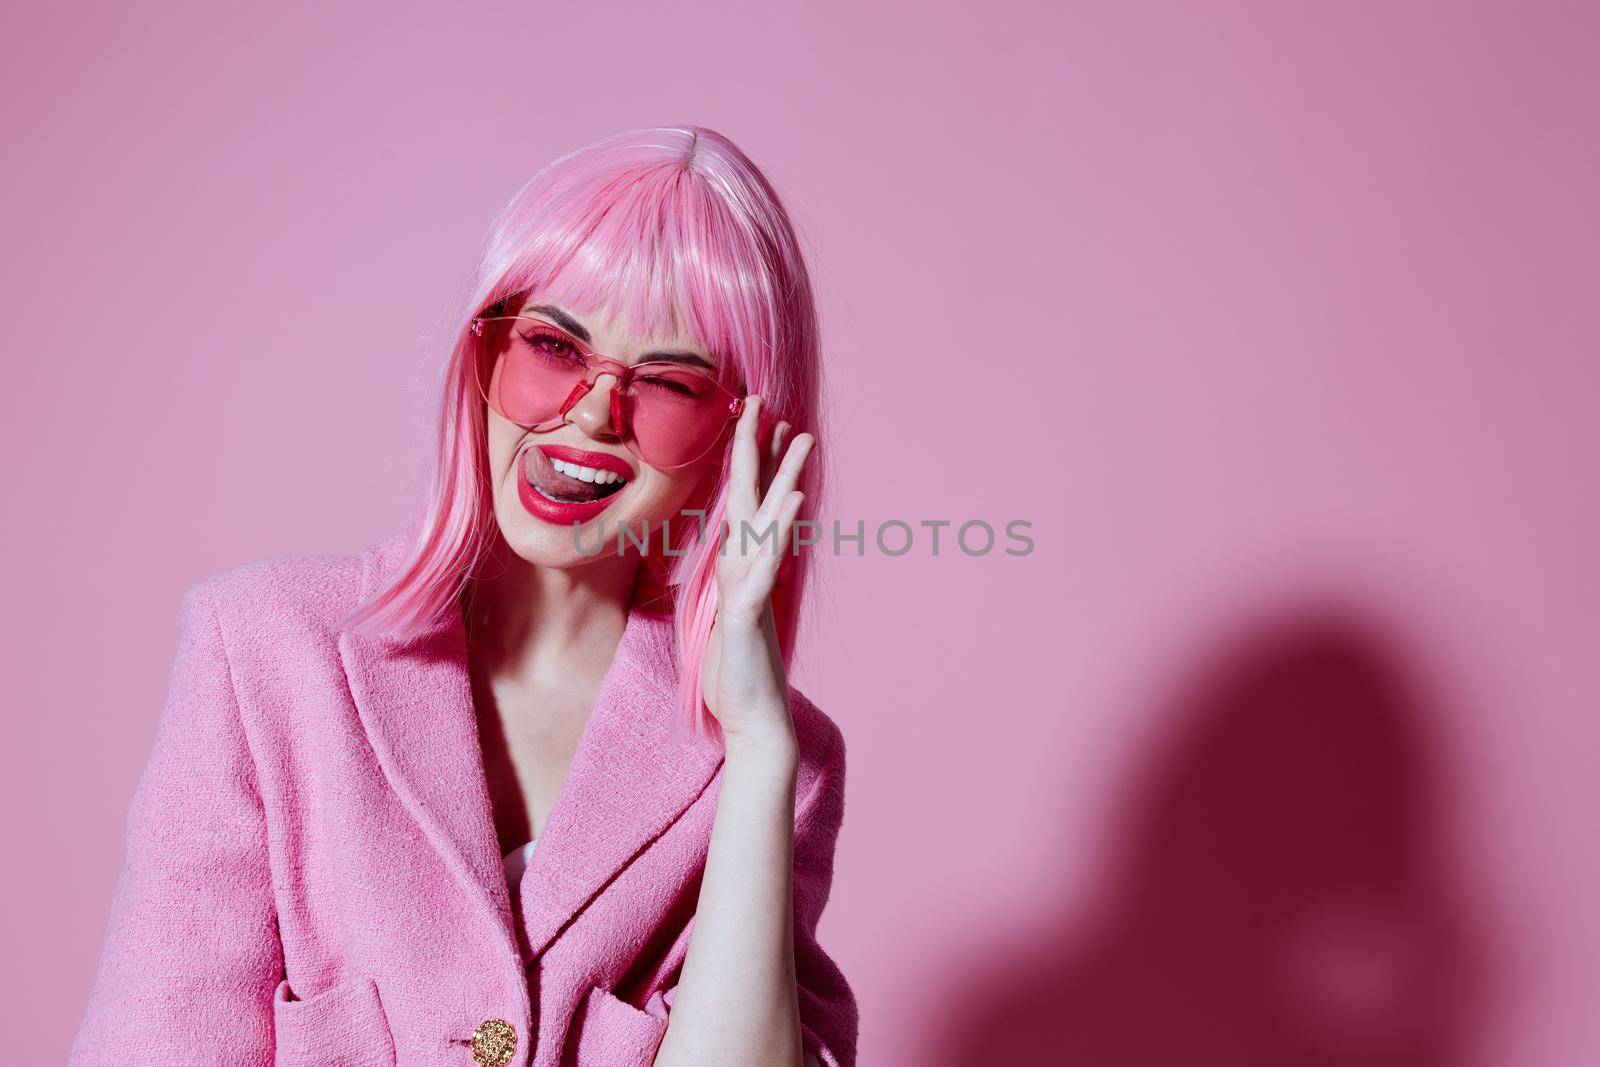 Portrait of a young woman gesturing with hands pink jacket lifestyle glamor pink background unaltered by SHOTPRIME